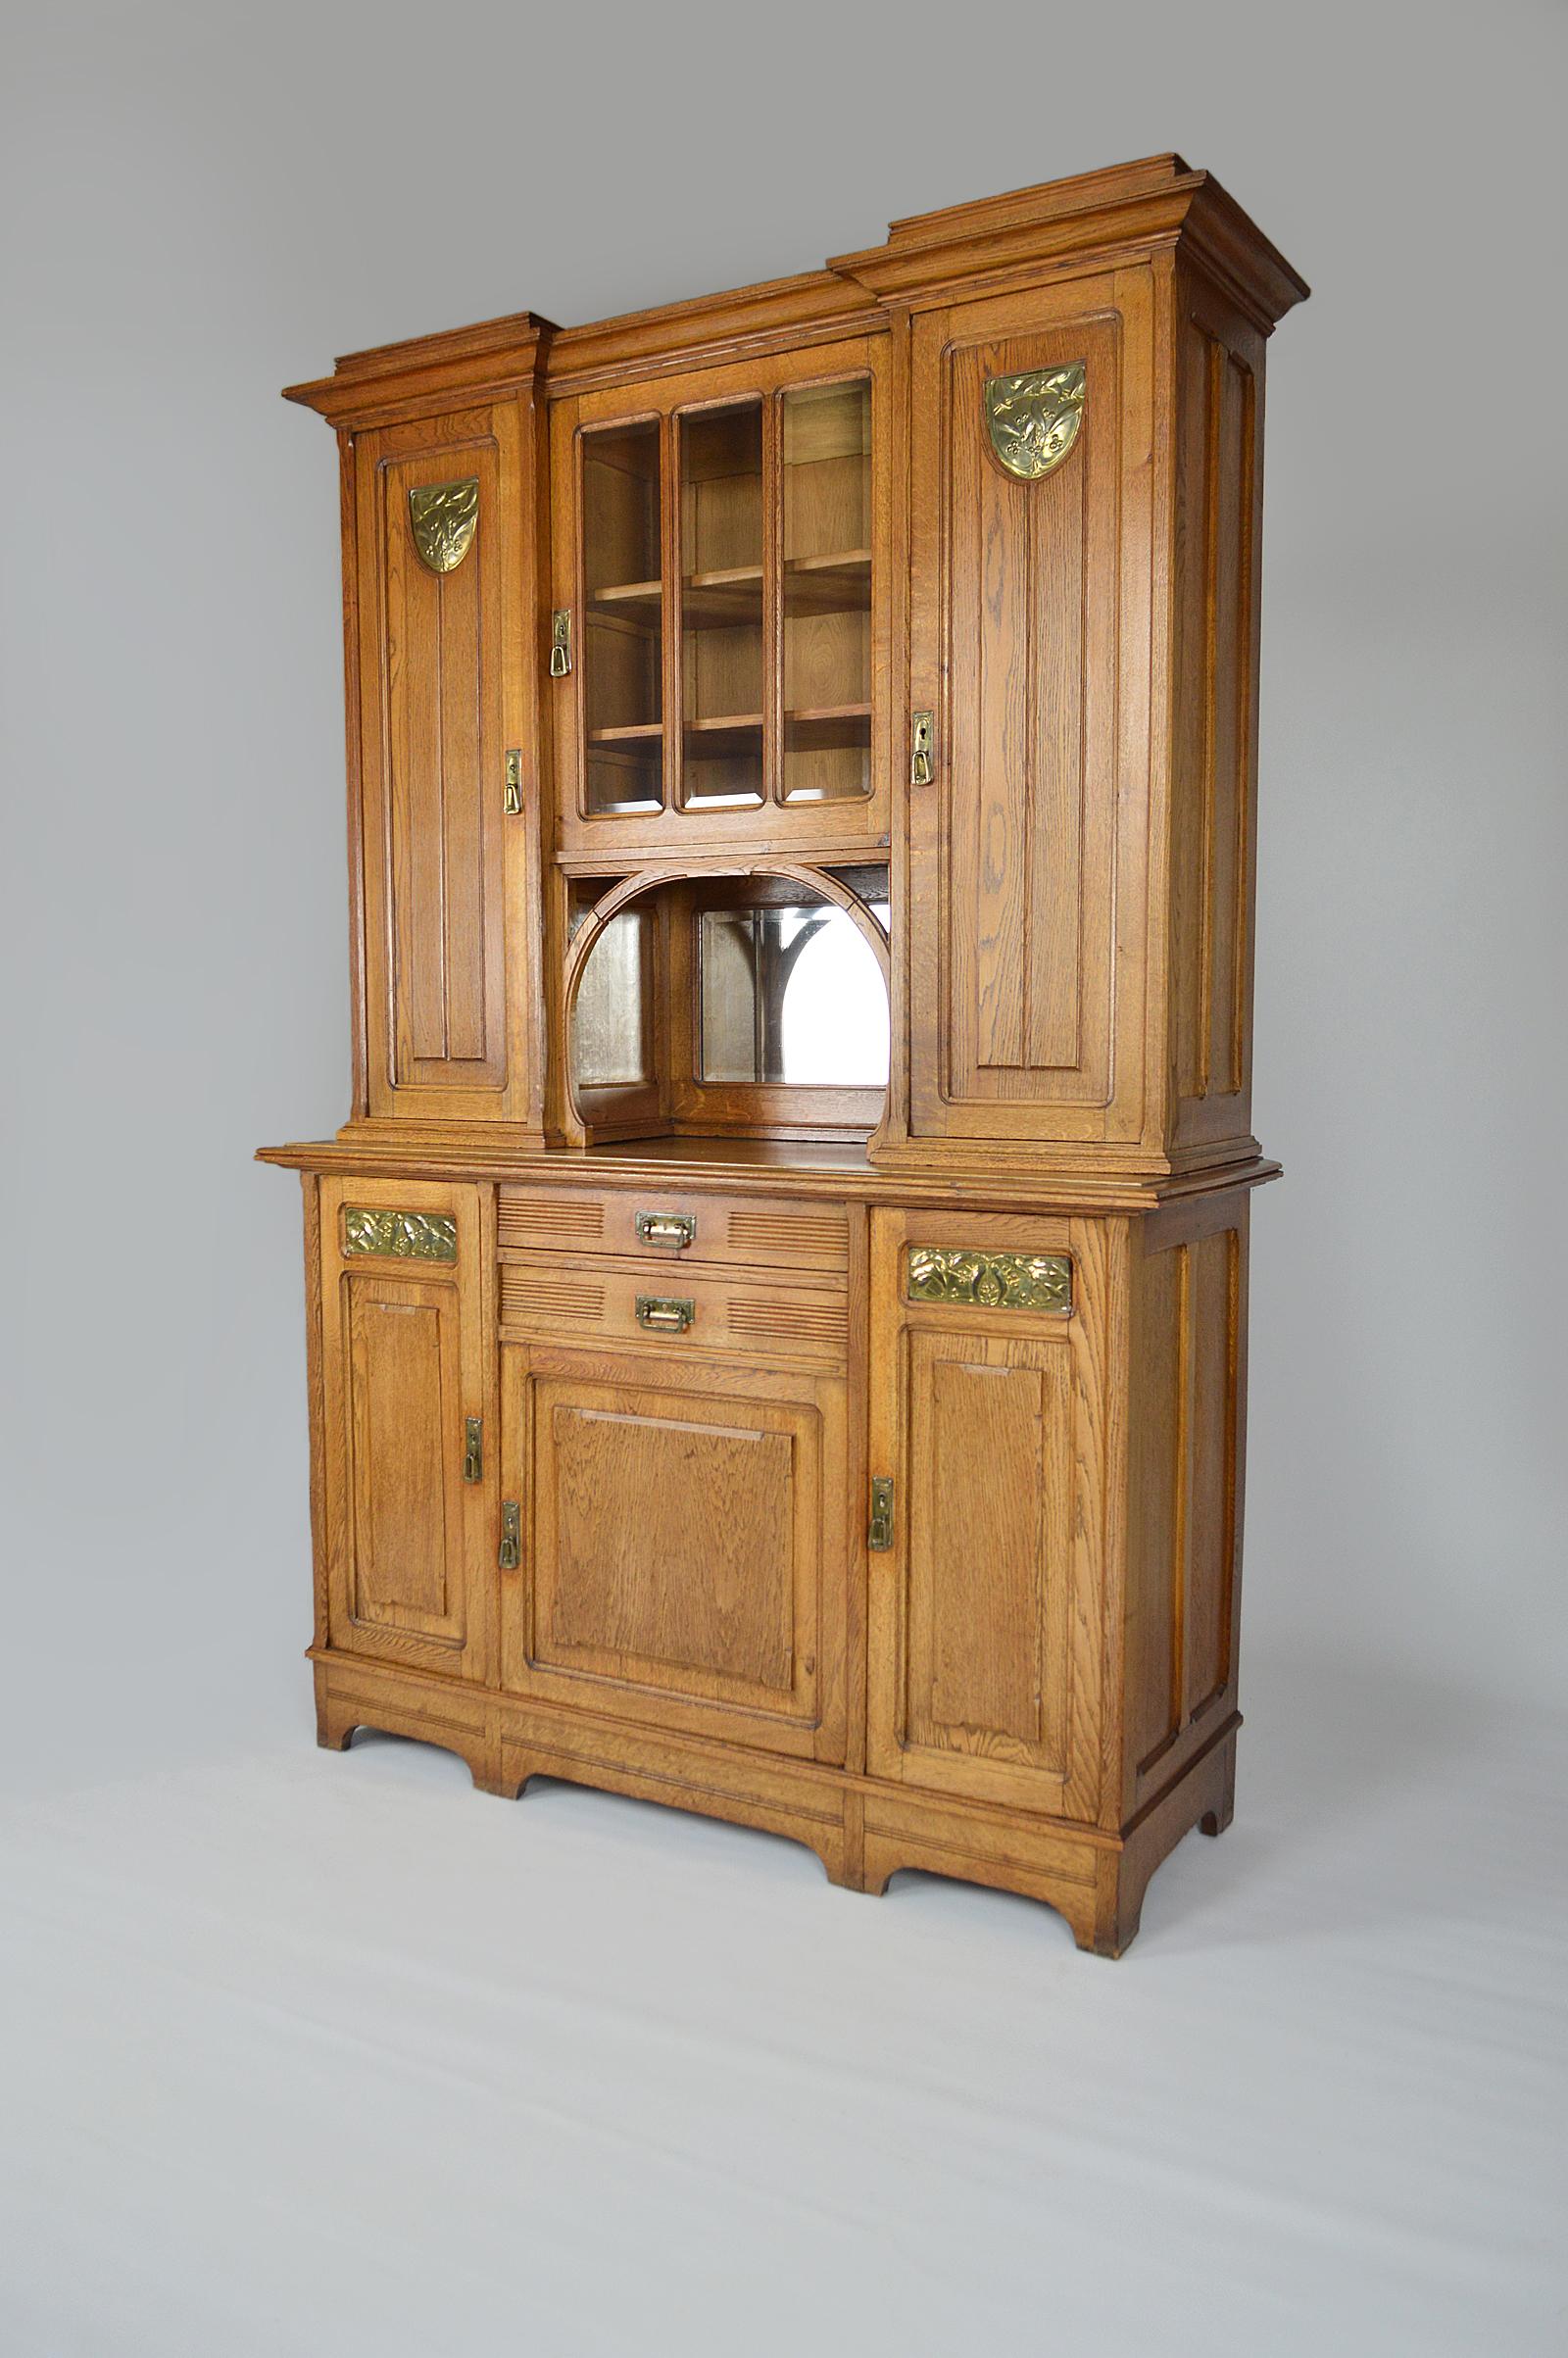 Buffet / china cabinet in solid paneled oak.

Interesting Belgian or French cabinetmaking and brasswork circa 1910-1920, certain influence of Anglo-Saxon Arts & Crafts movements and Dutch Nieuwe Kunst, we are on a piece from the transitional